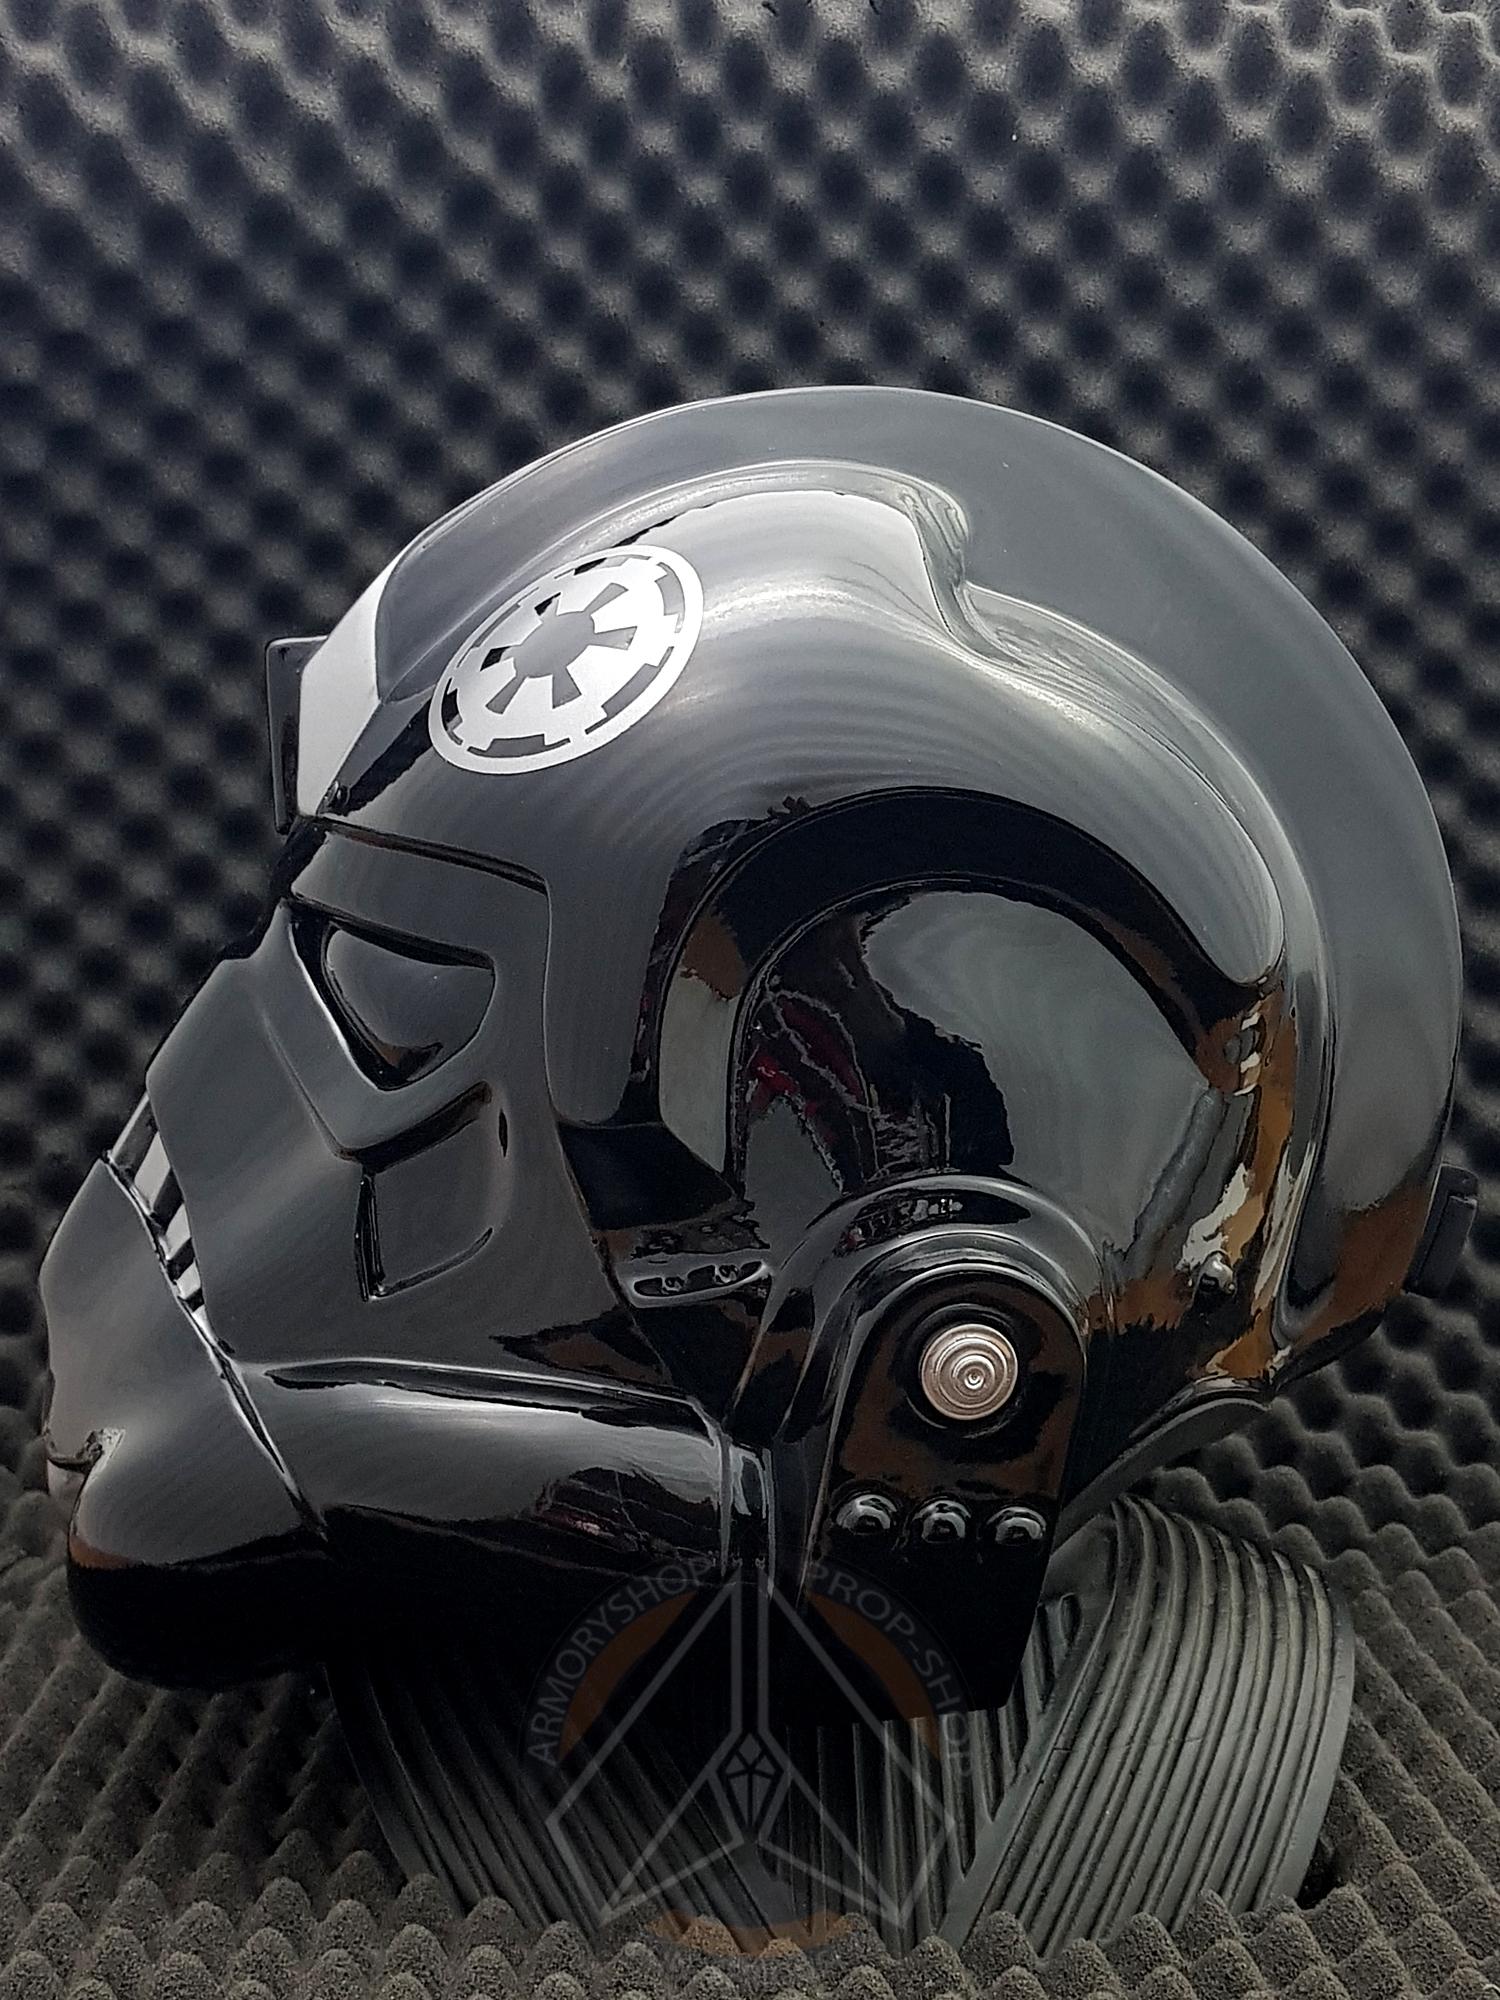 Imperial TIE Pilot Helmet Lt. OXIXO Variant (Clean, Finished)